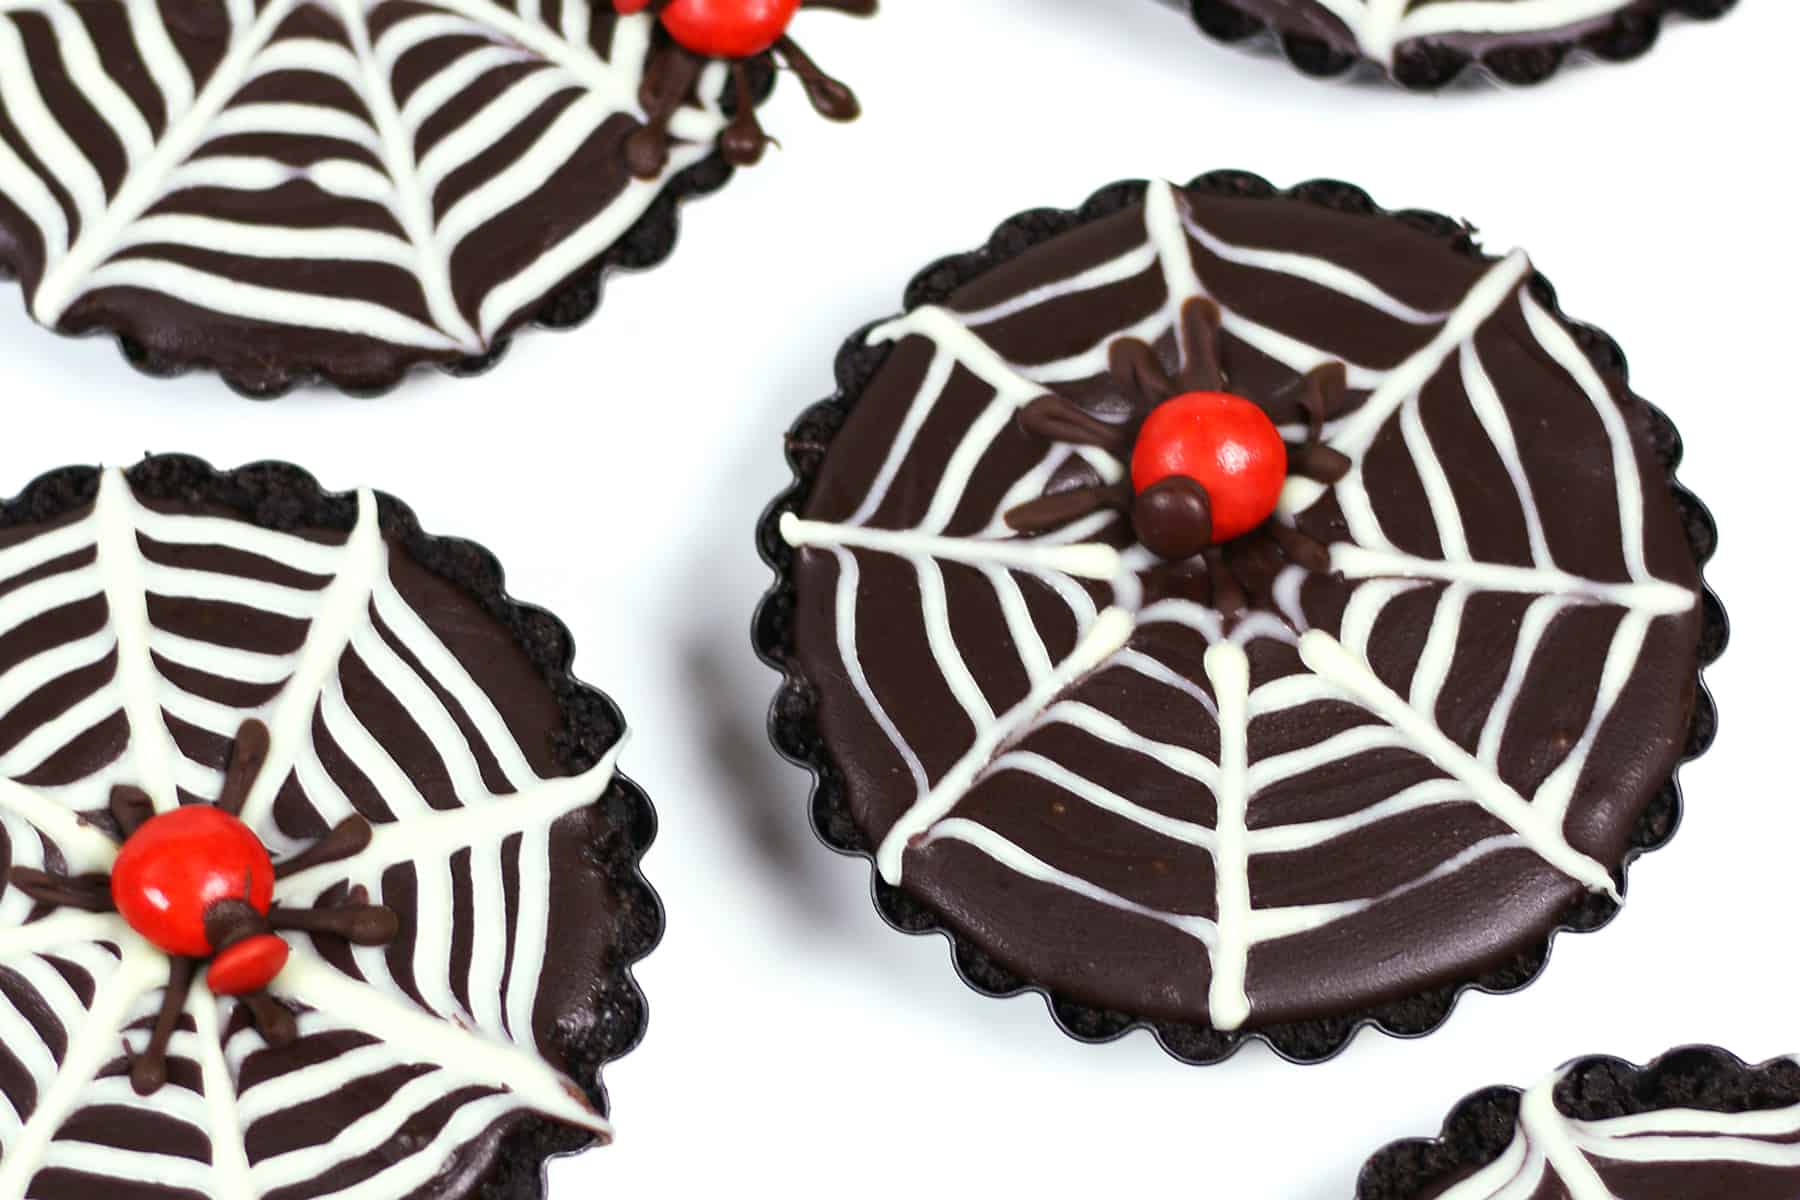 A group of chocolate spider web tarts on a white surface.